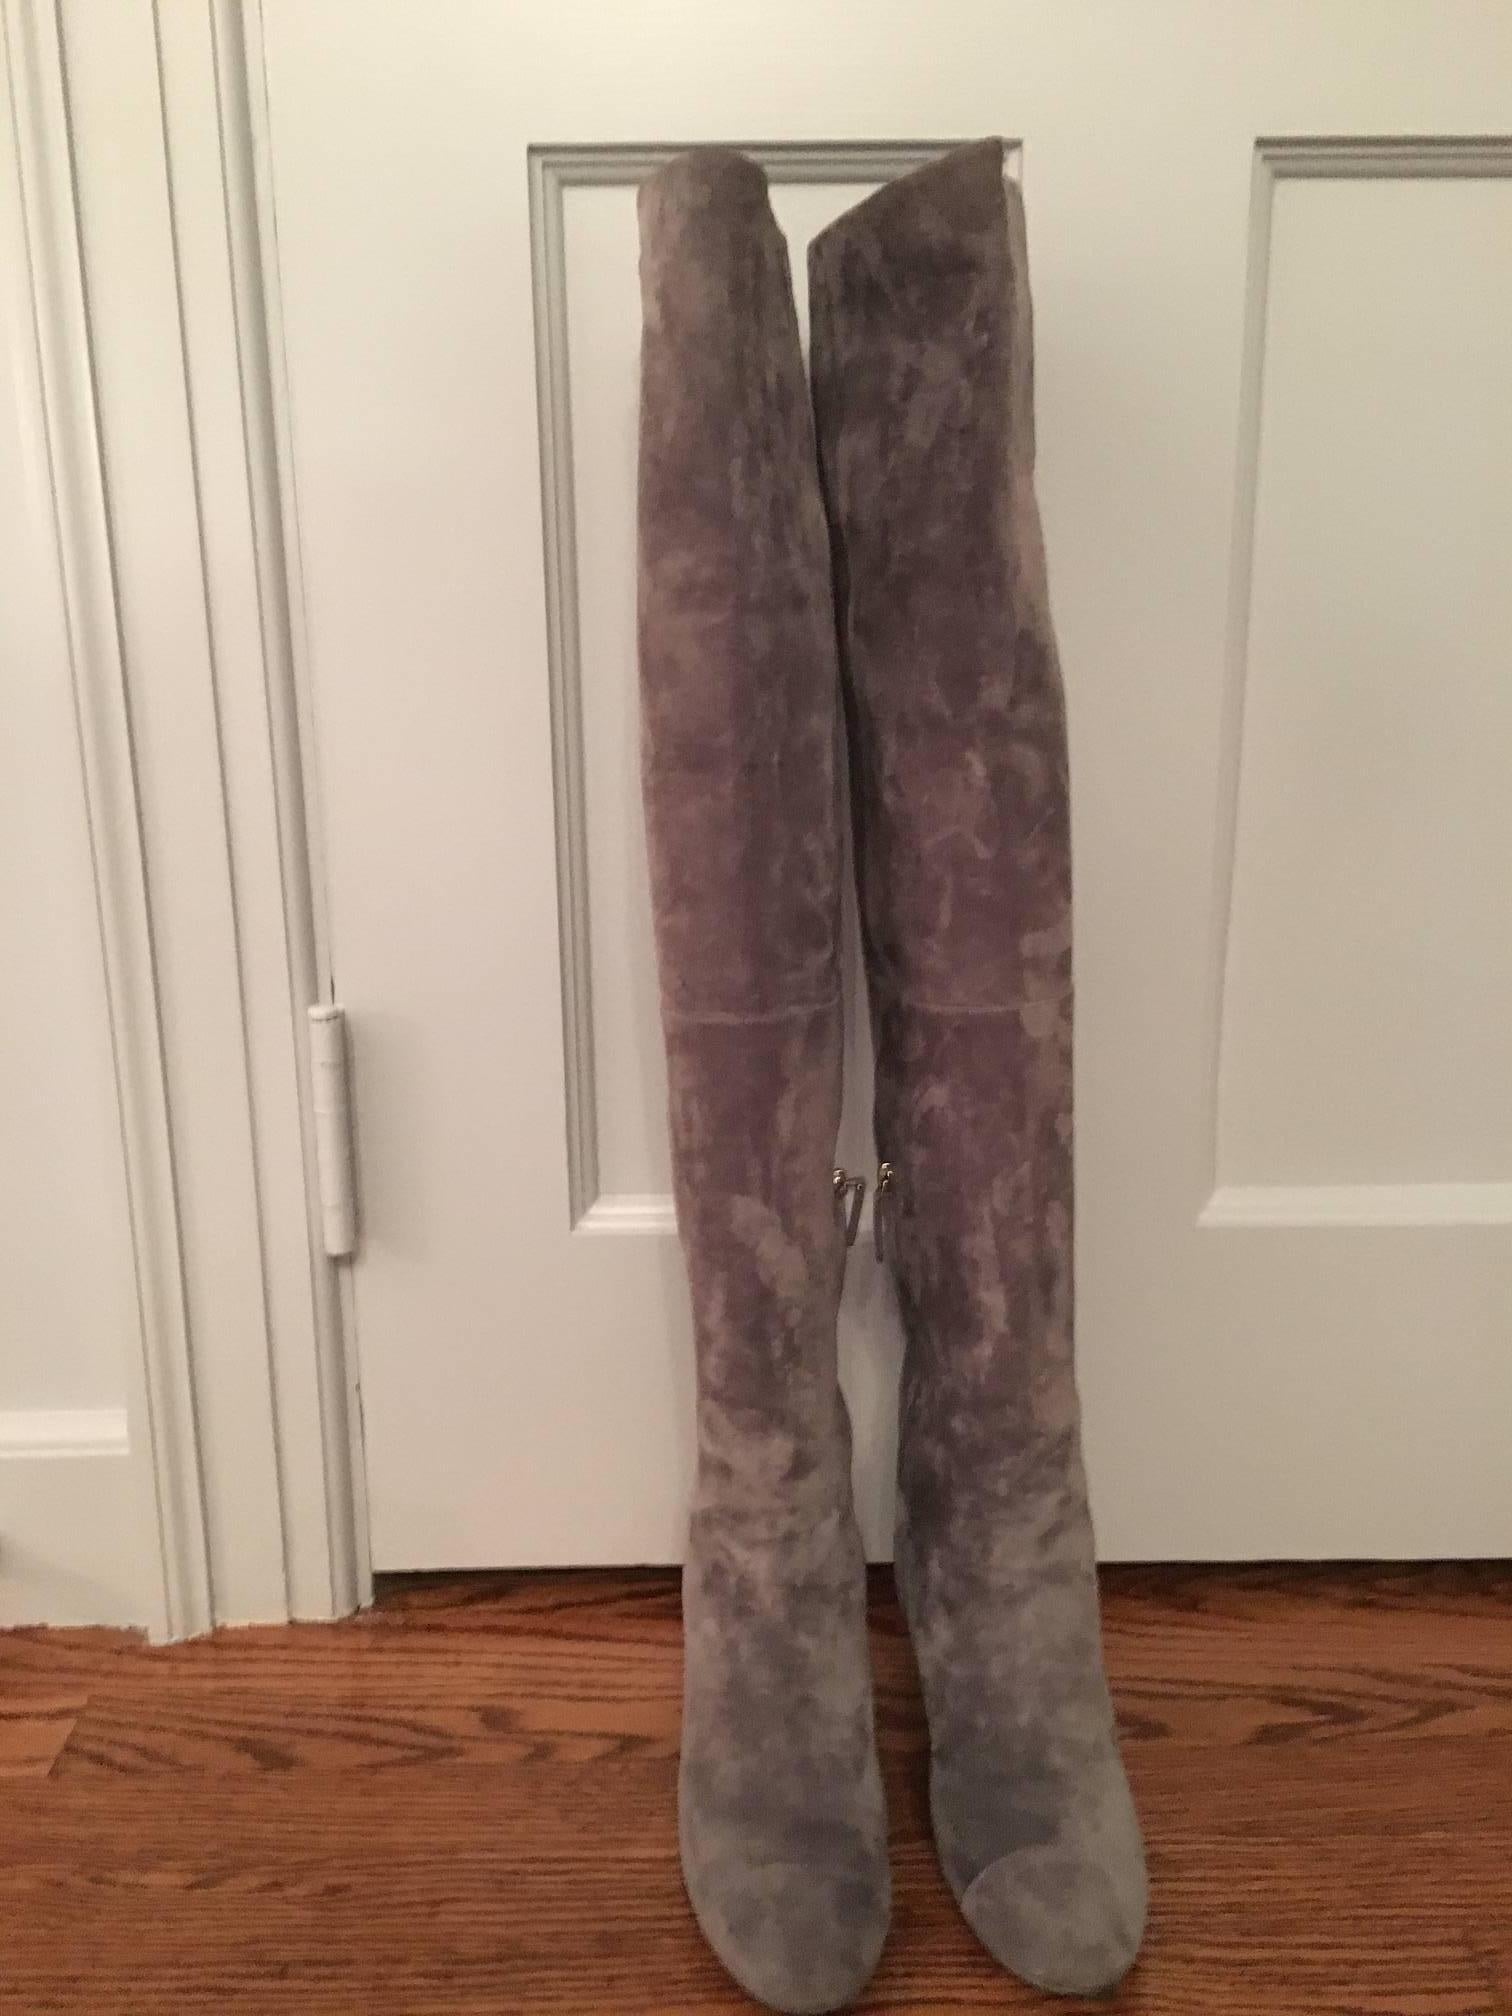 Women's Contemporary Chanel High Boots in Gray